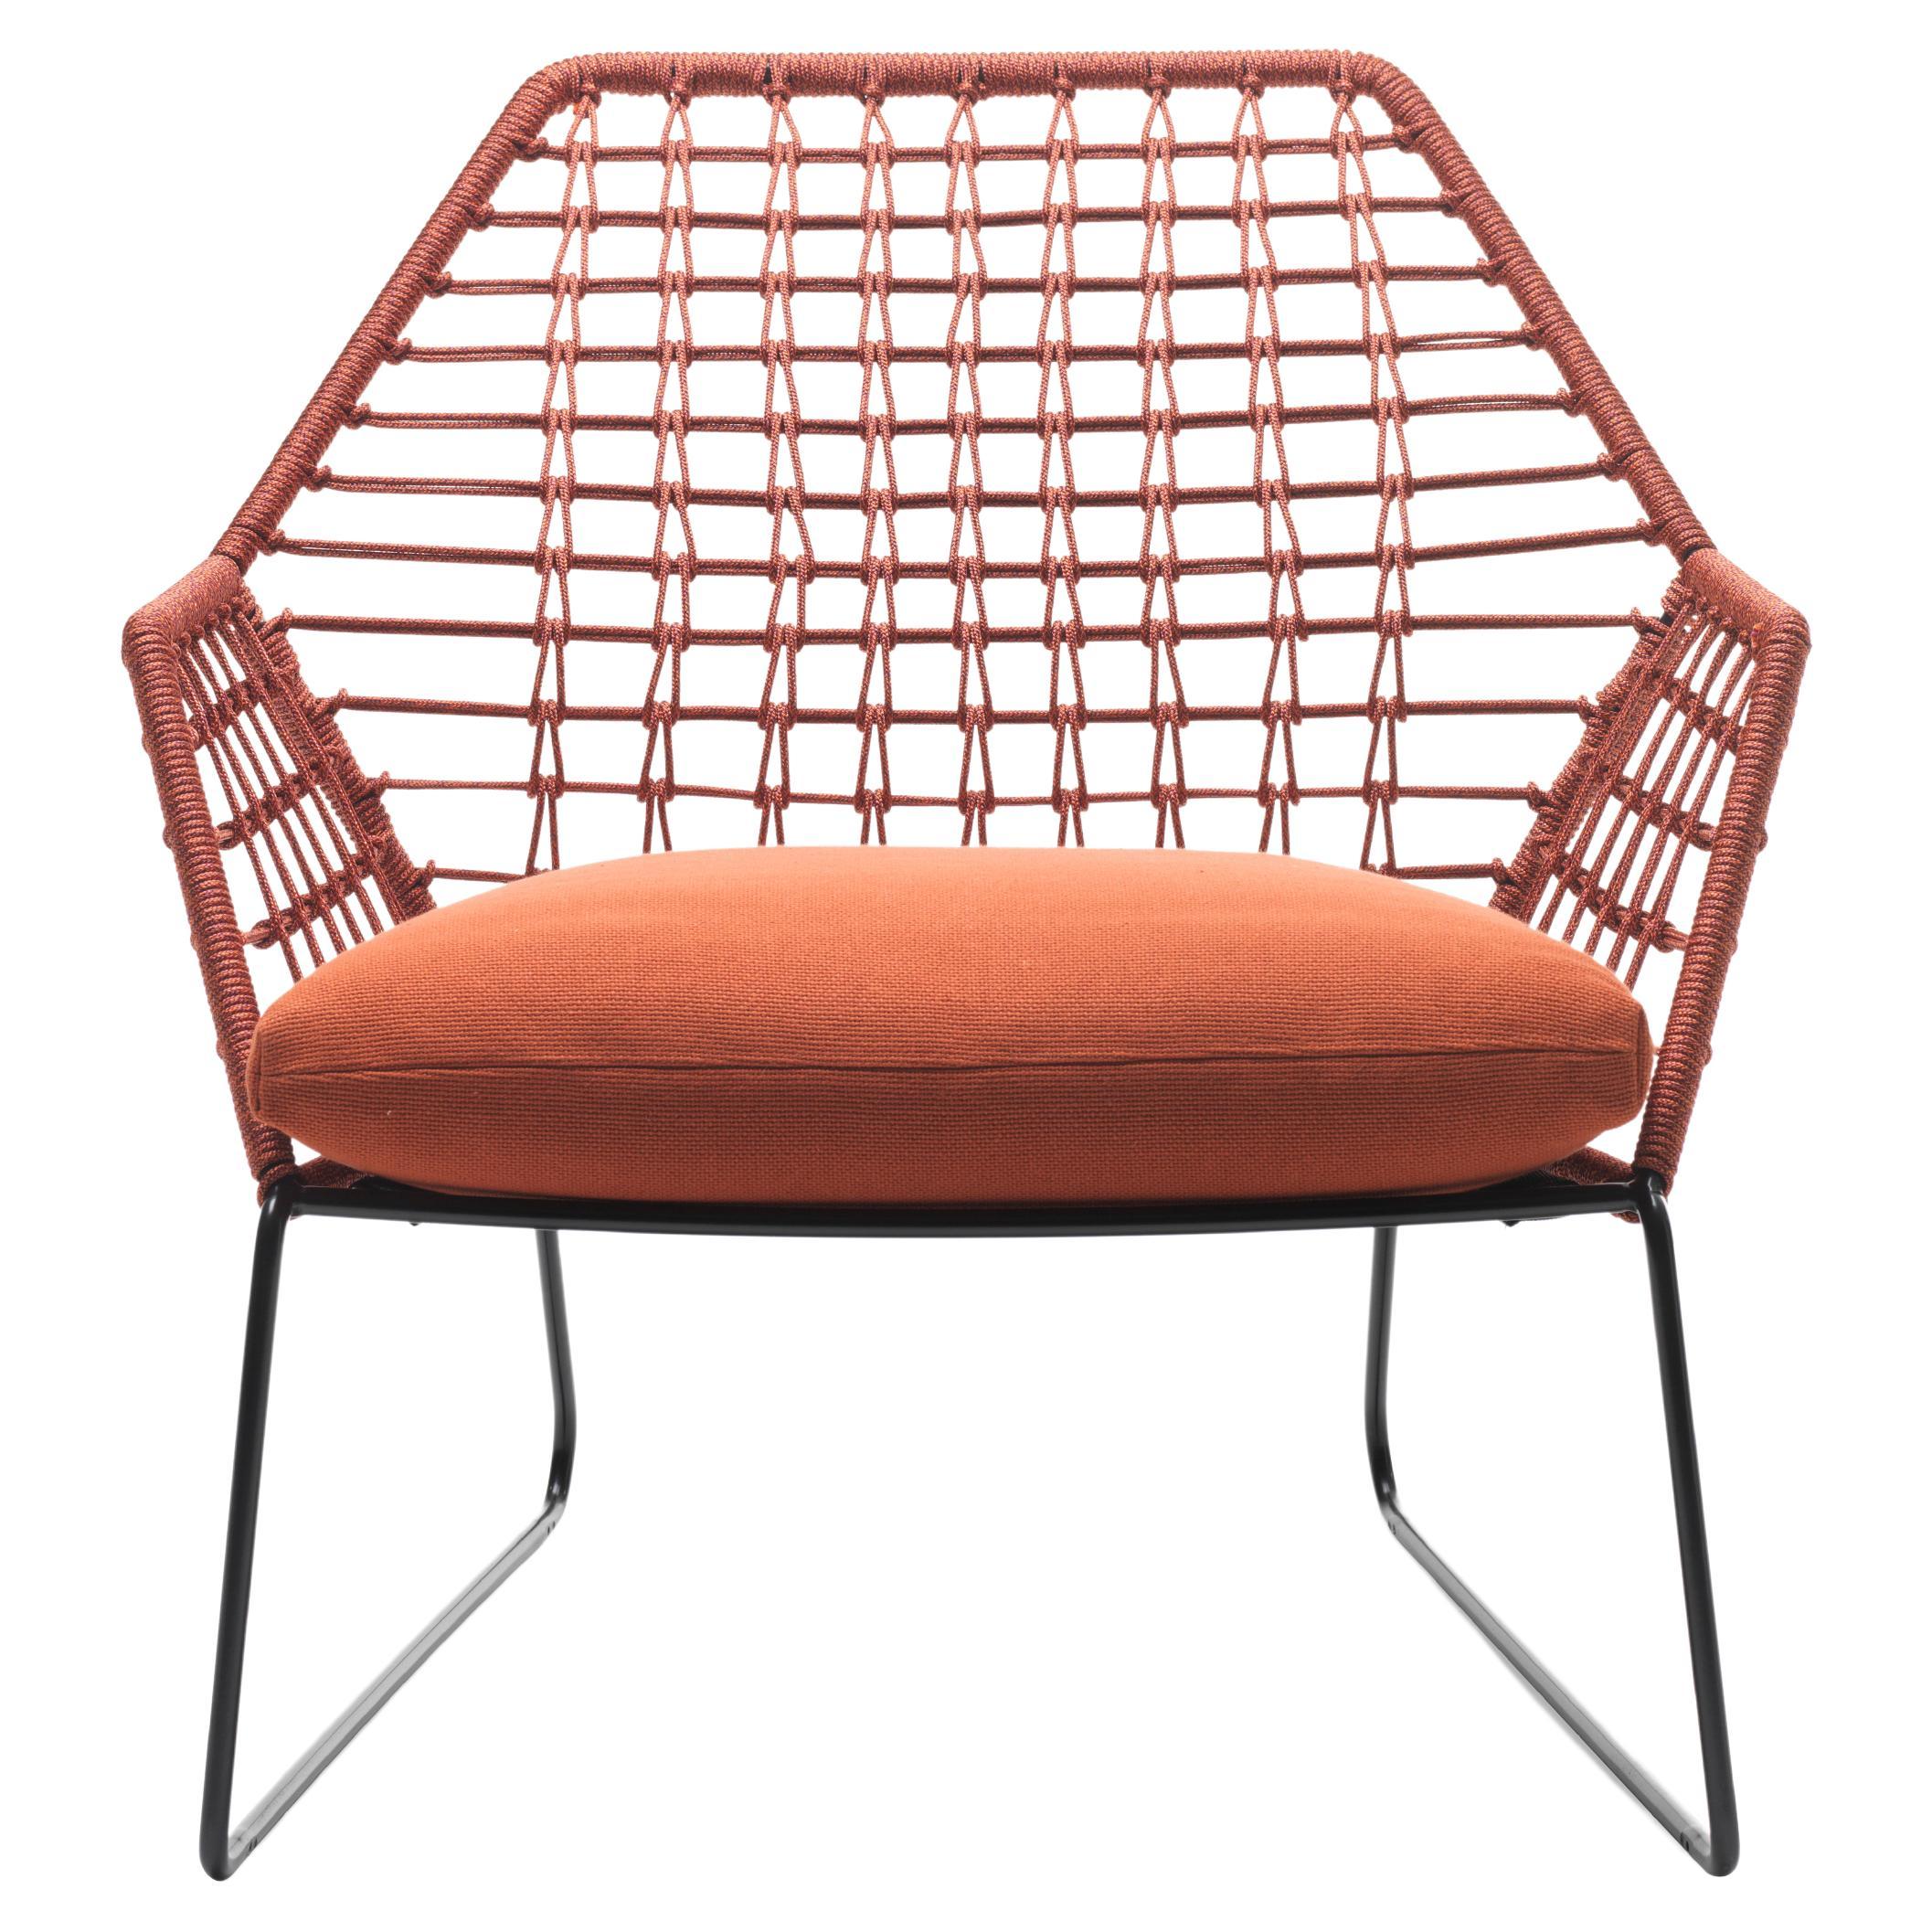 New York Soleil Armchair with Orange Rope Frame & Black Legs by Sergio Bicego For Sale